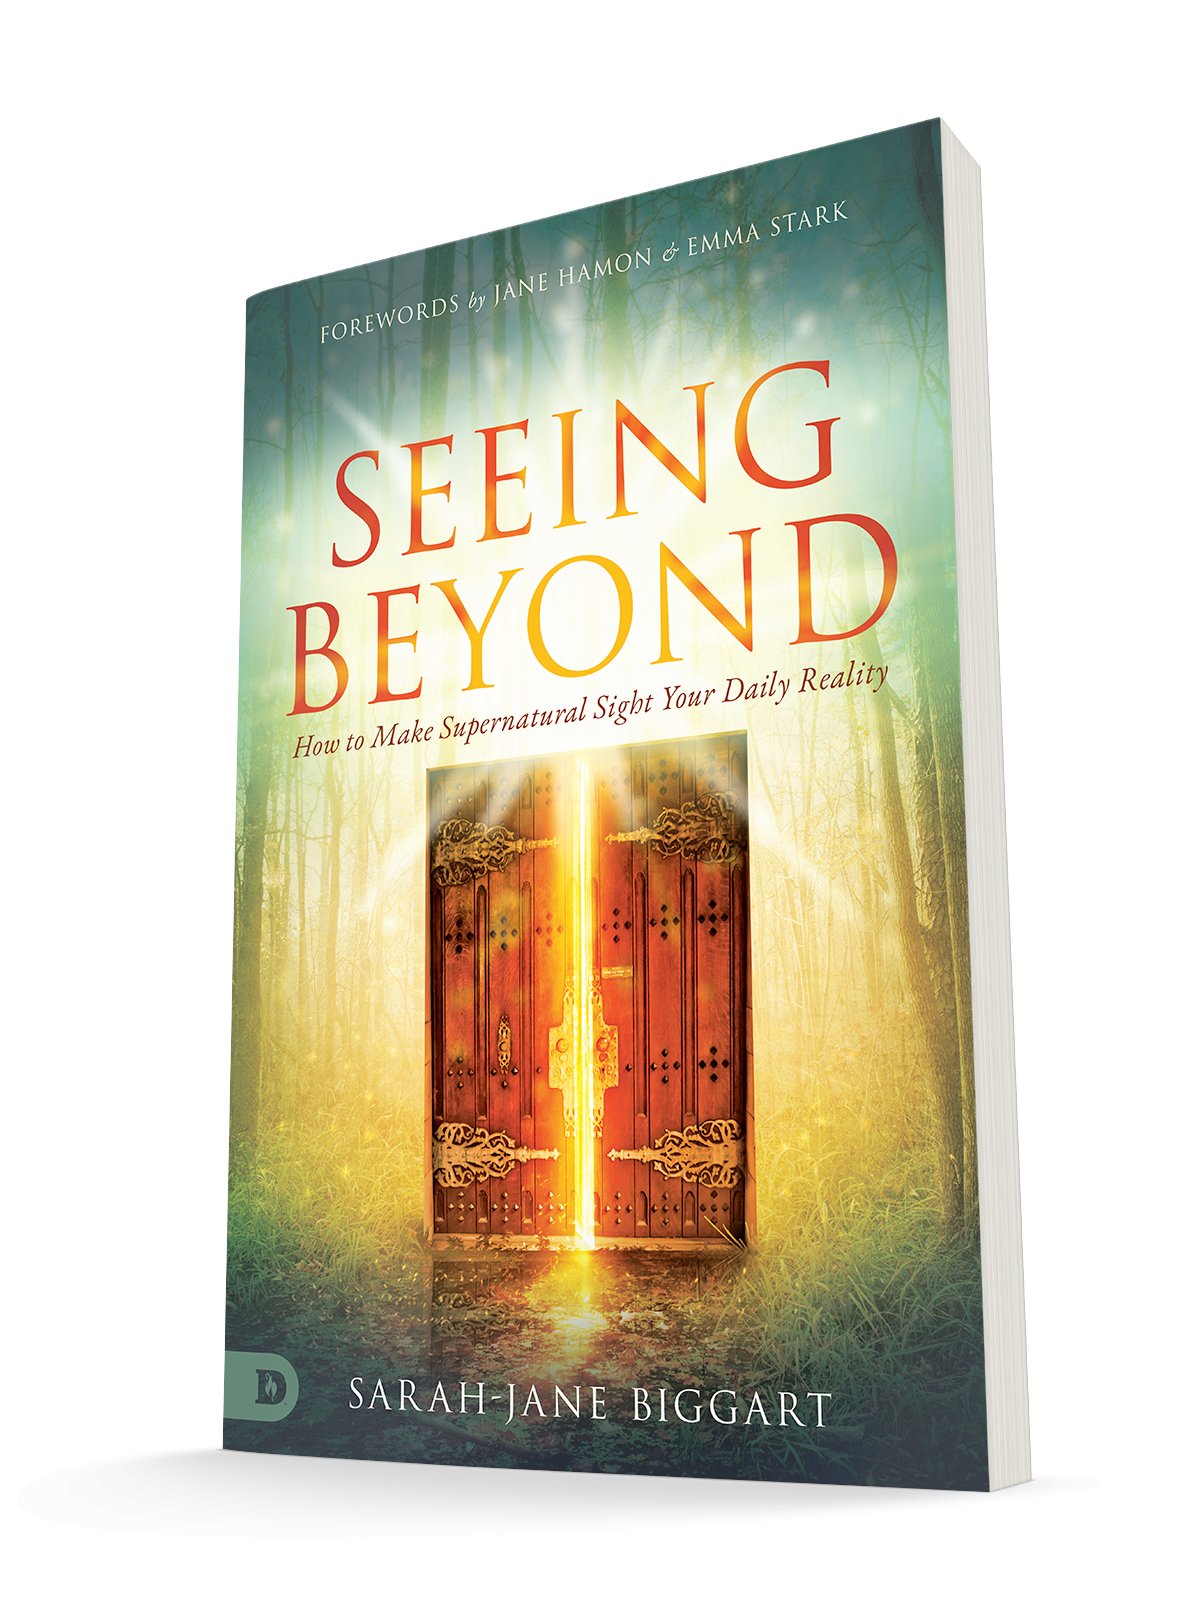 Seeing Beyond: How to Make Supernatural Sight Your Daily Reality Paperback – November 16, 2021